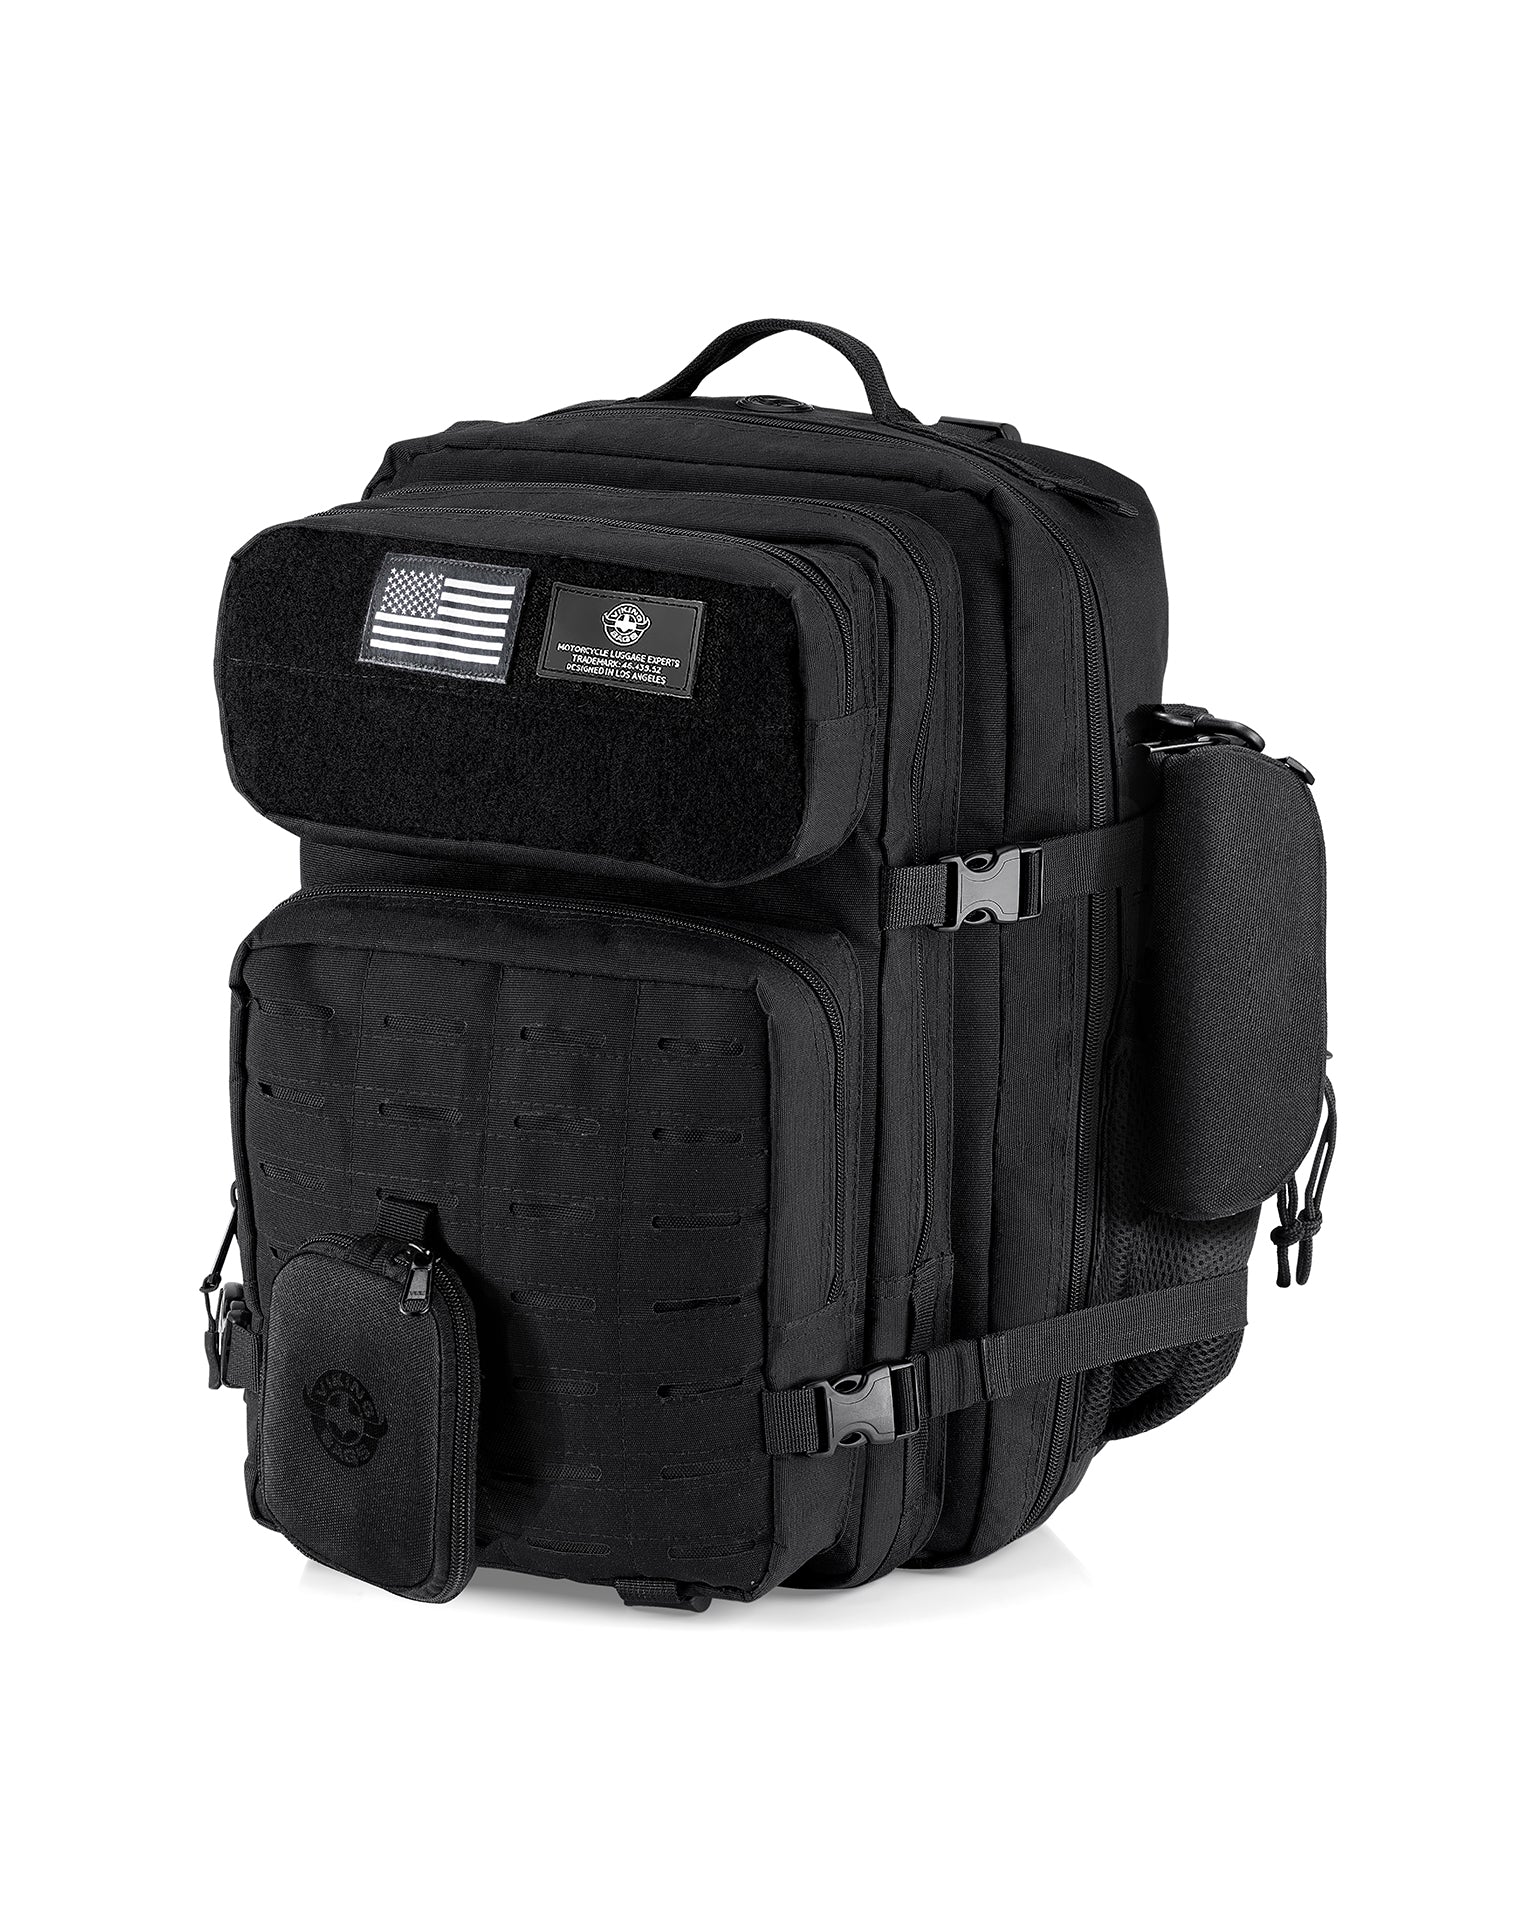 45L - Tactical XL Motorcycle Tail Bag for Harley Davidson